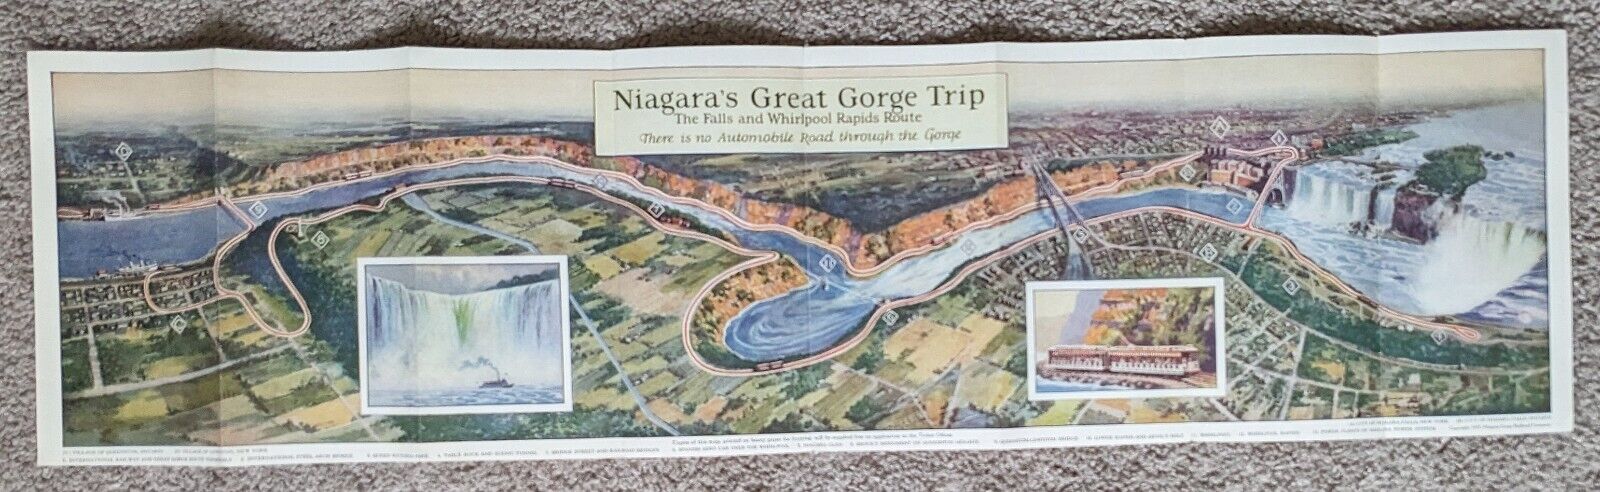 1927 Vintage Niagara\'s Great Gorge Trip The Falls and Whirlpool Rapids Route Map